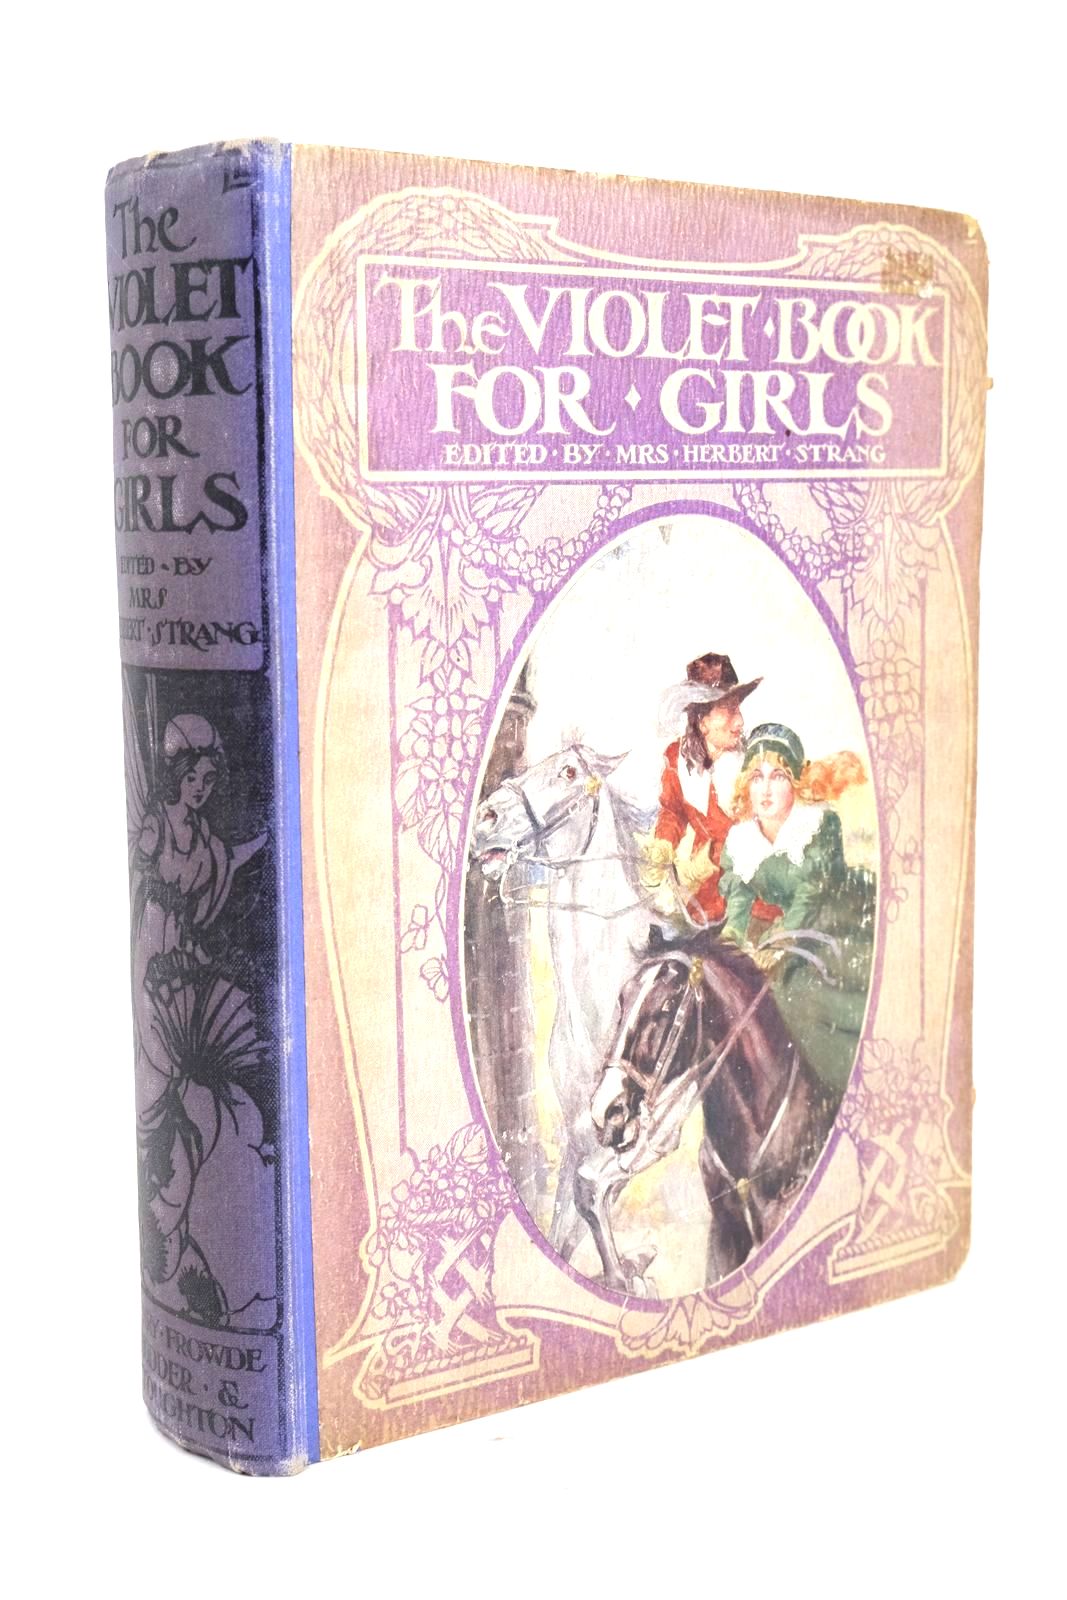 Photo of THE VIOLET BOOK FOR GIRLS written by Strang, Mrs. Herbert
Mansfield, Estrith E.
Brazil, Angela
et al,  illustrated by Robinson, T.H.
Robinson, Charles
et al.,  published by Hodder & Stoughton, Henry Frowde (STOCK CODE: 1325519)  for sale by Stella & Rose's Books